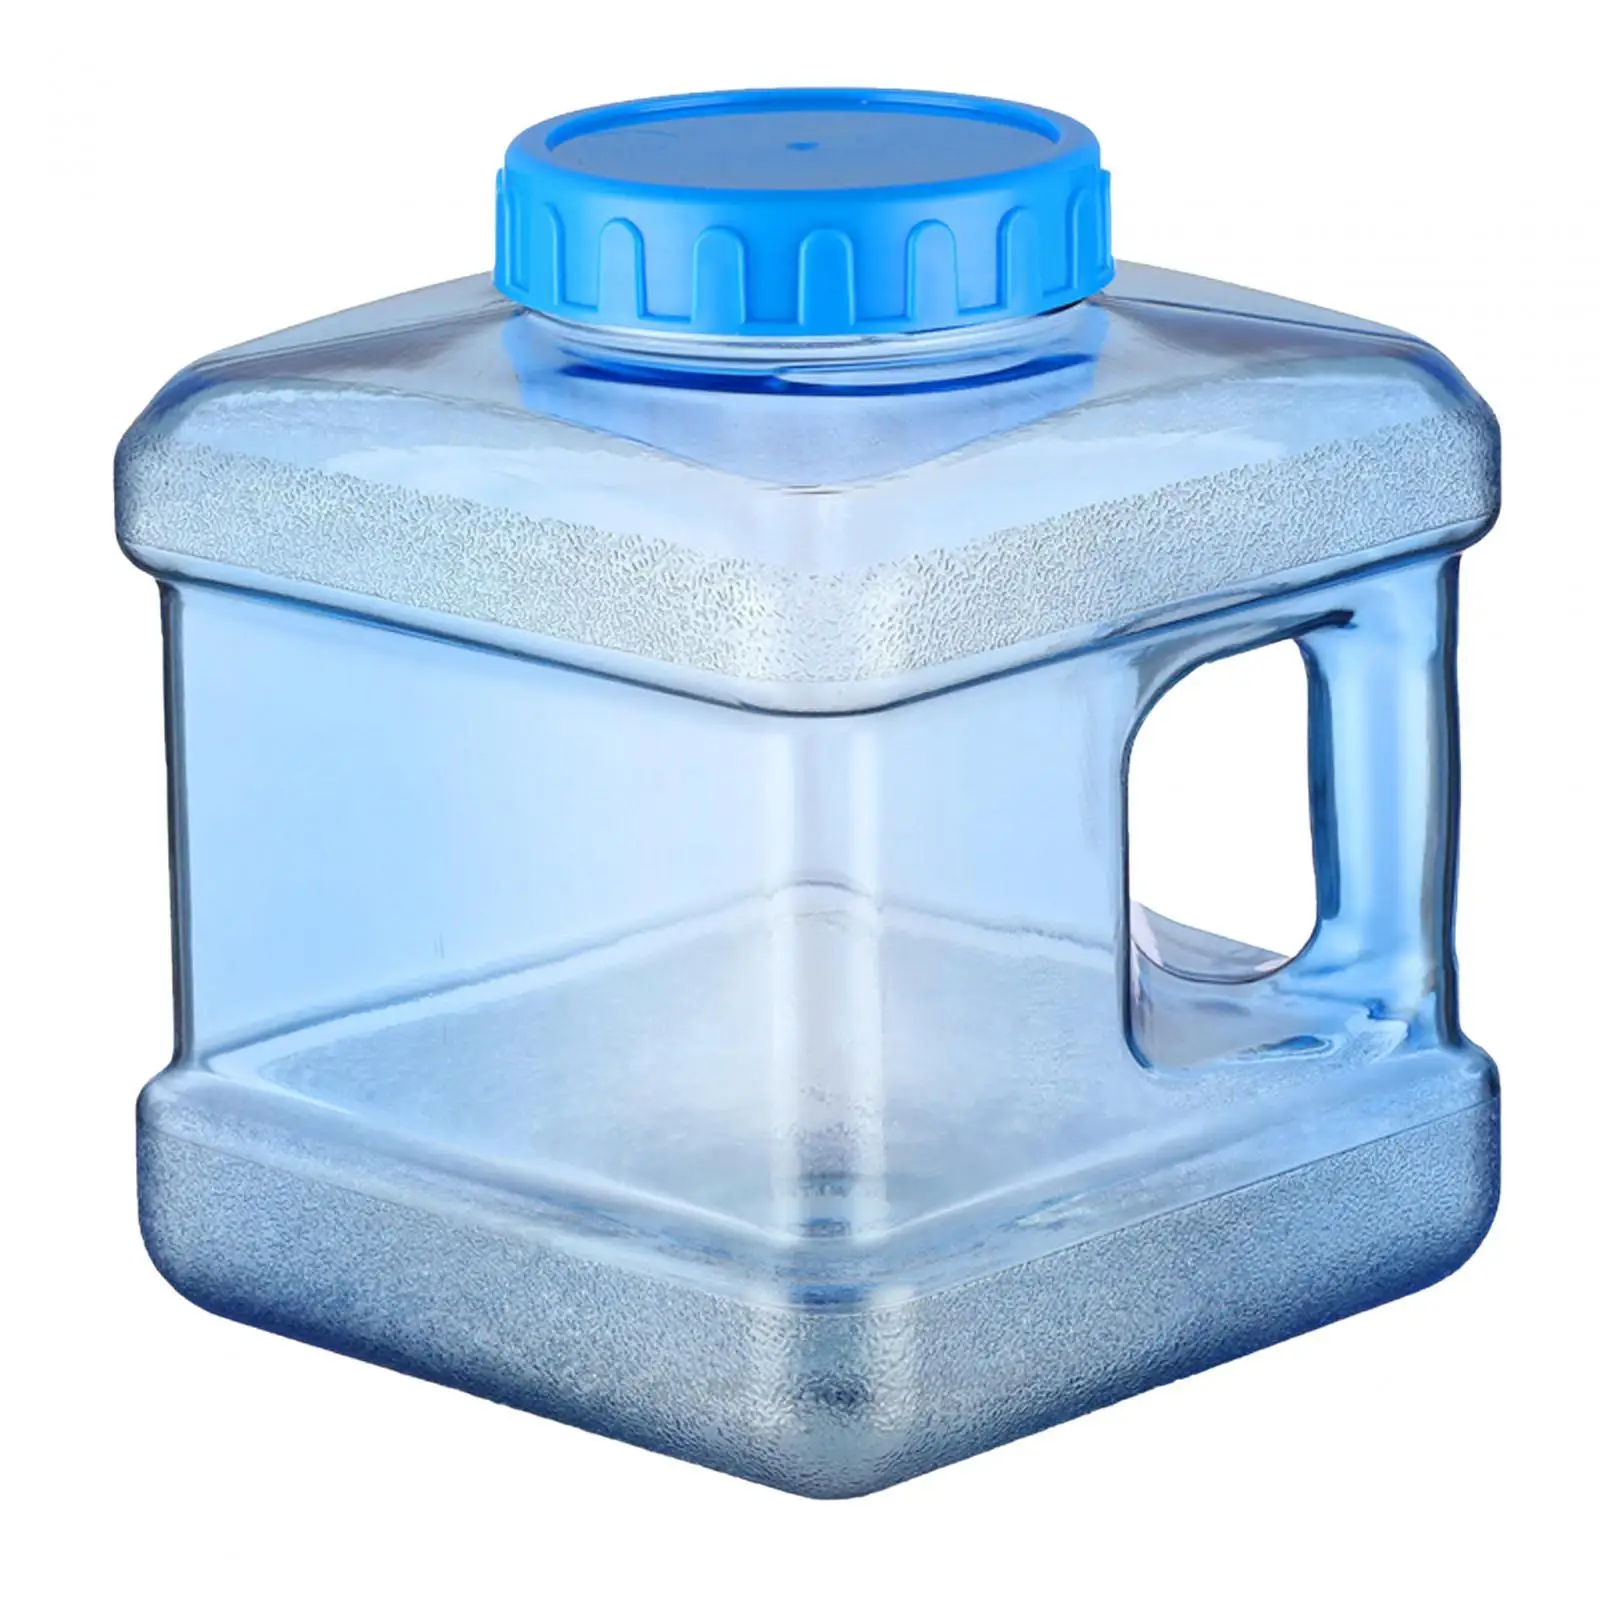 Camping Water Storage Jug Water Bucket Water Container Water Bottle Carrier for Bathing Cars